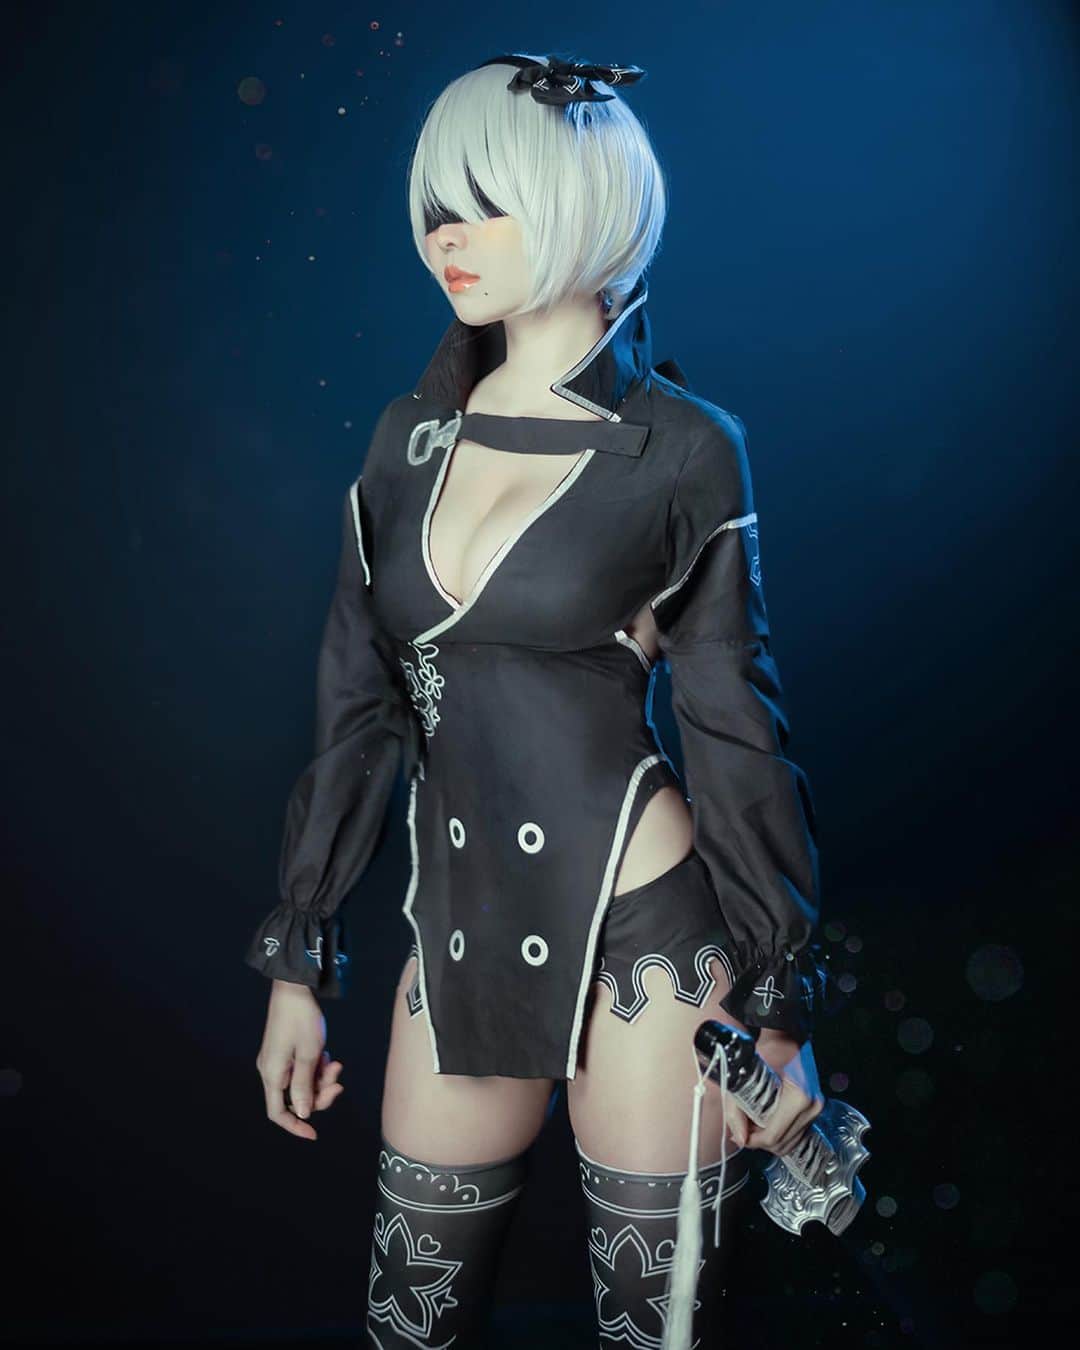 Elyのインスタグラム：「Preview of Septembert 2022 rewards ! This month is lined up ~ all 2B from NieR series.💯 Although it is not a new wifu~, but I played the mobile game version recently, and can't stop my love for 2B💕 I want to cos my favorite styles and share them with you this month ✦More photo set :check in Bio  ✦～✦～✦ お待たせしました～今月の4セットの写真のプレビューはこちらです！ 最近ニーアリィンカーネーション遊びました。✨ やはり昔から大好きな2Bコスプレしたくて、色んなスタイルを挑戦してみました！　  ✦～✦～✦ E子來公開9月的造型啦~!!✨ 這個月一字排開~都是NieR系列的2B 雖然不是大家的新老婆了，但是最近玩了手遊版又燃起對2B小姐姐的愛，想把喜歡的造型都cos一下，在這個月分享給大家  也給自己的長~~到不行的預訂表填個坑💕」